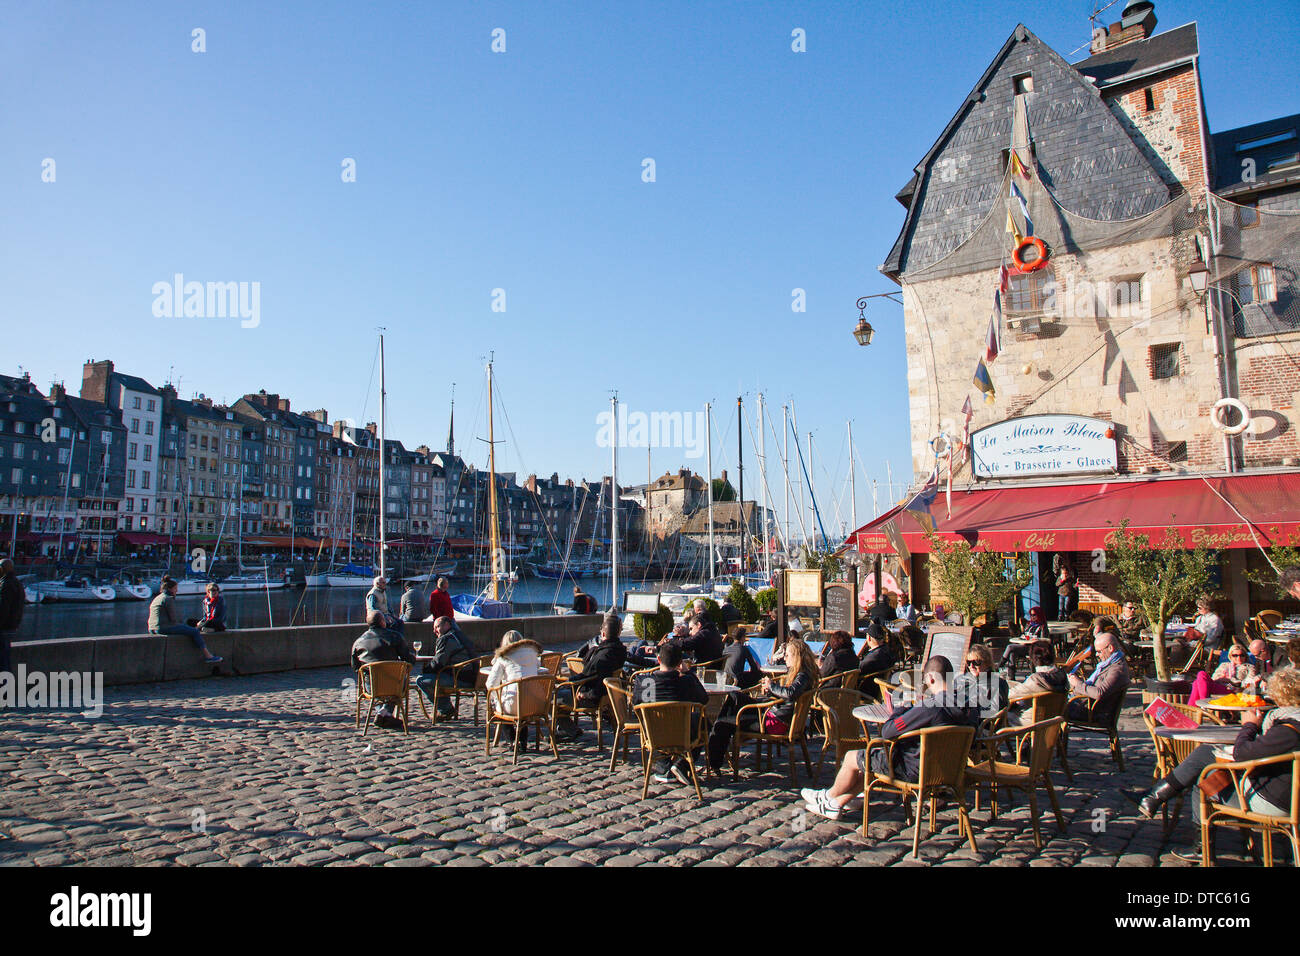 Outdoor terrace of the cafe La Maison Bleue beside the harbour in Honfleur, Normandy, France Stock Photo